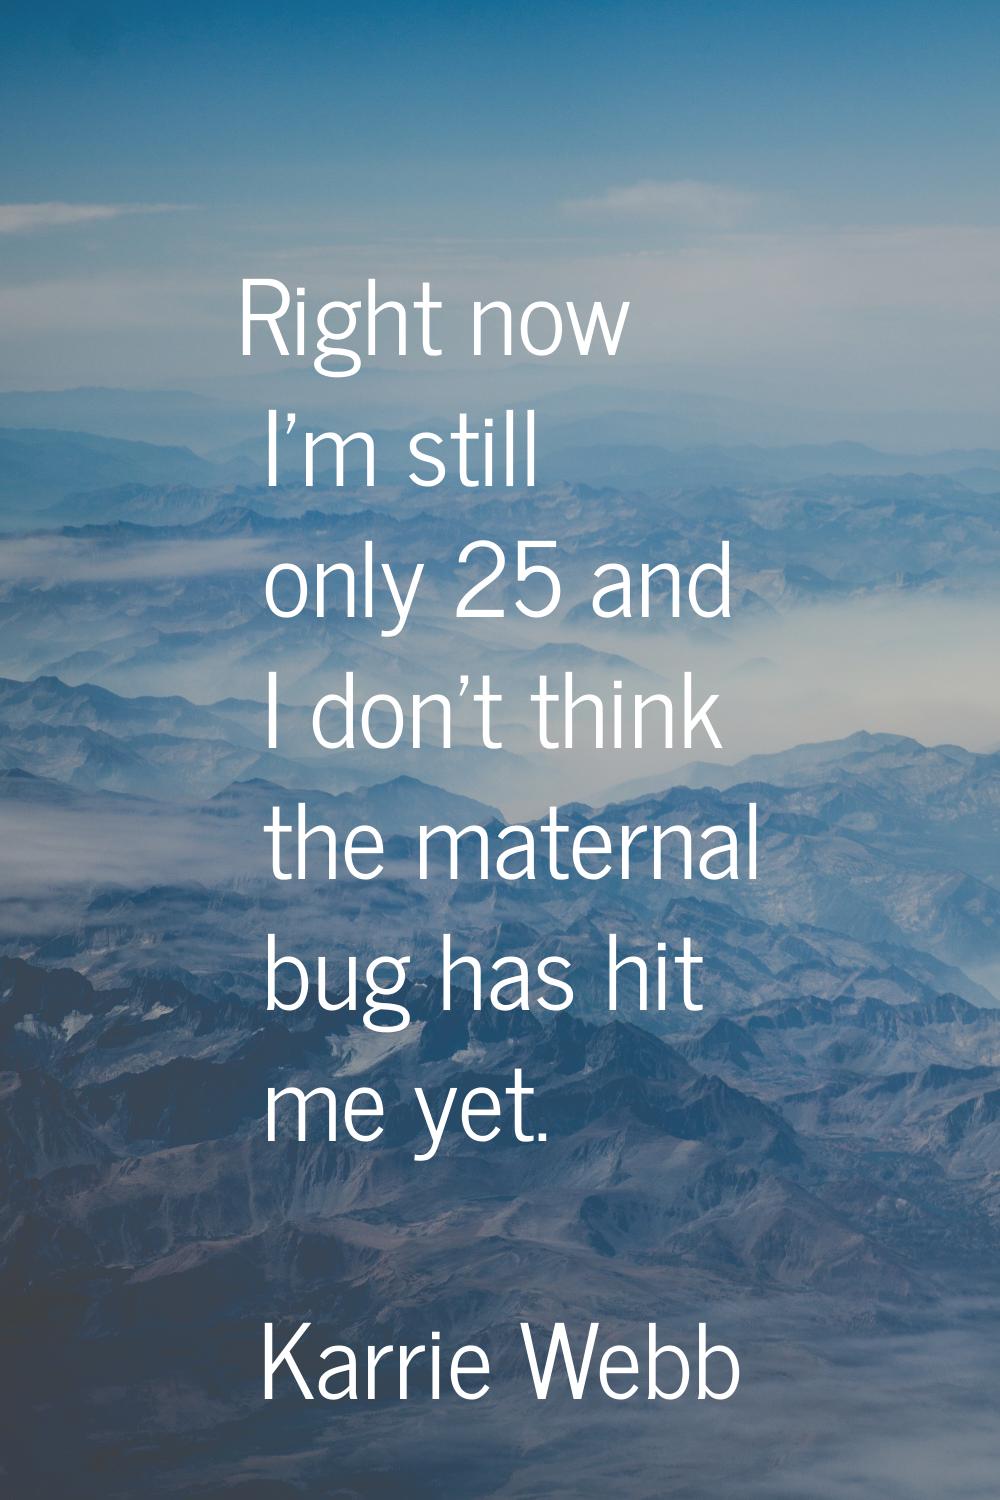 Right now I'm still only 25 and I don't think the maternal bug has hit me yet.